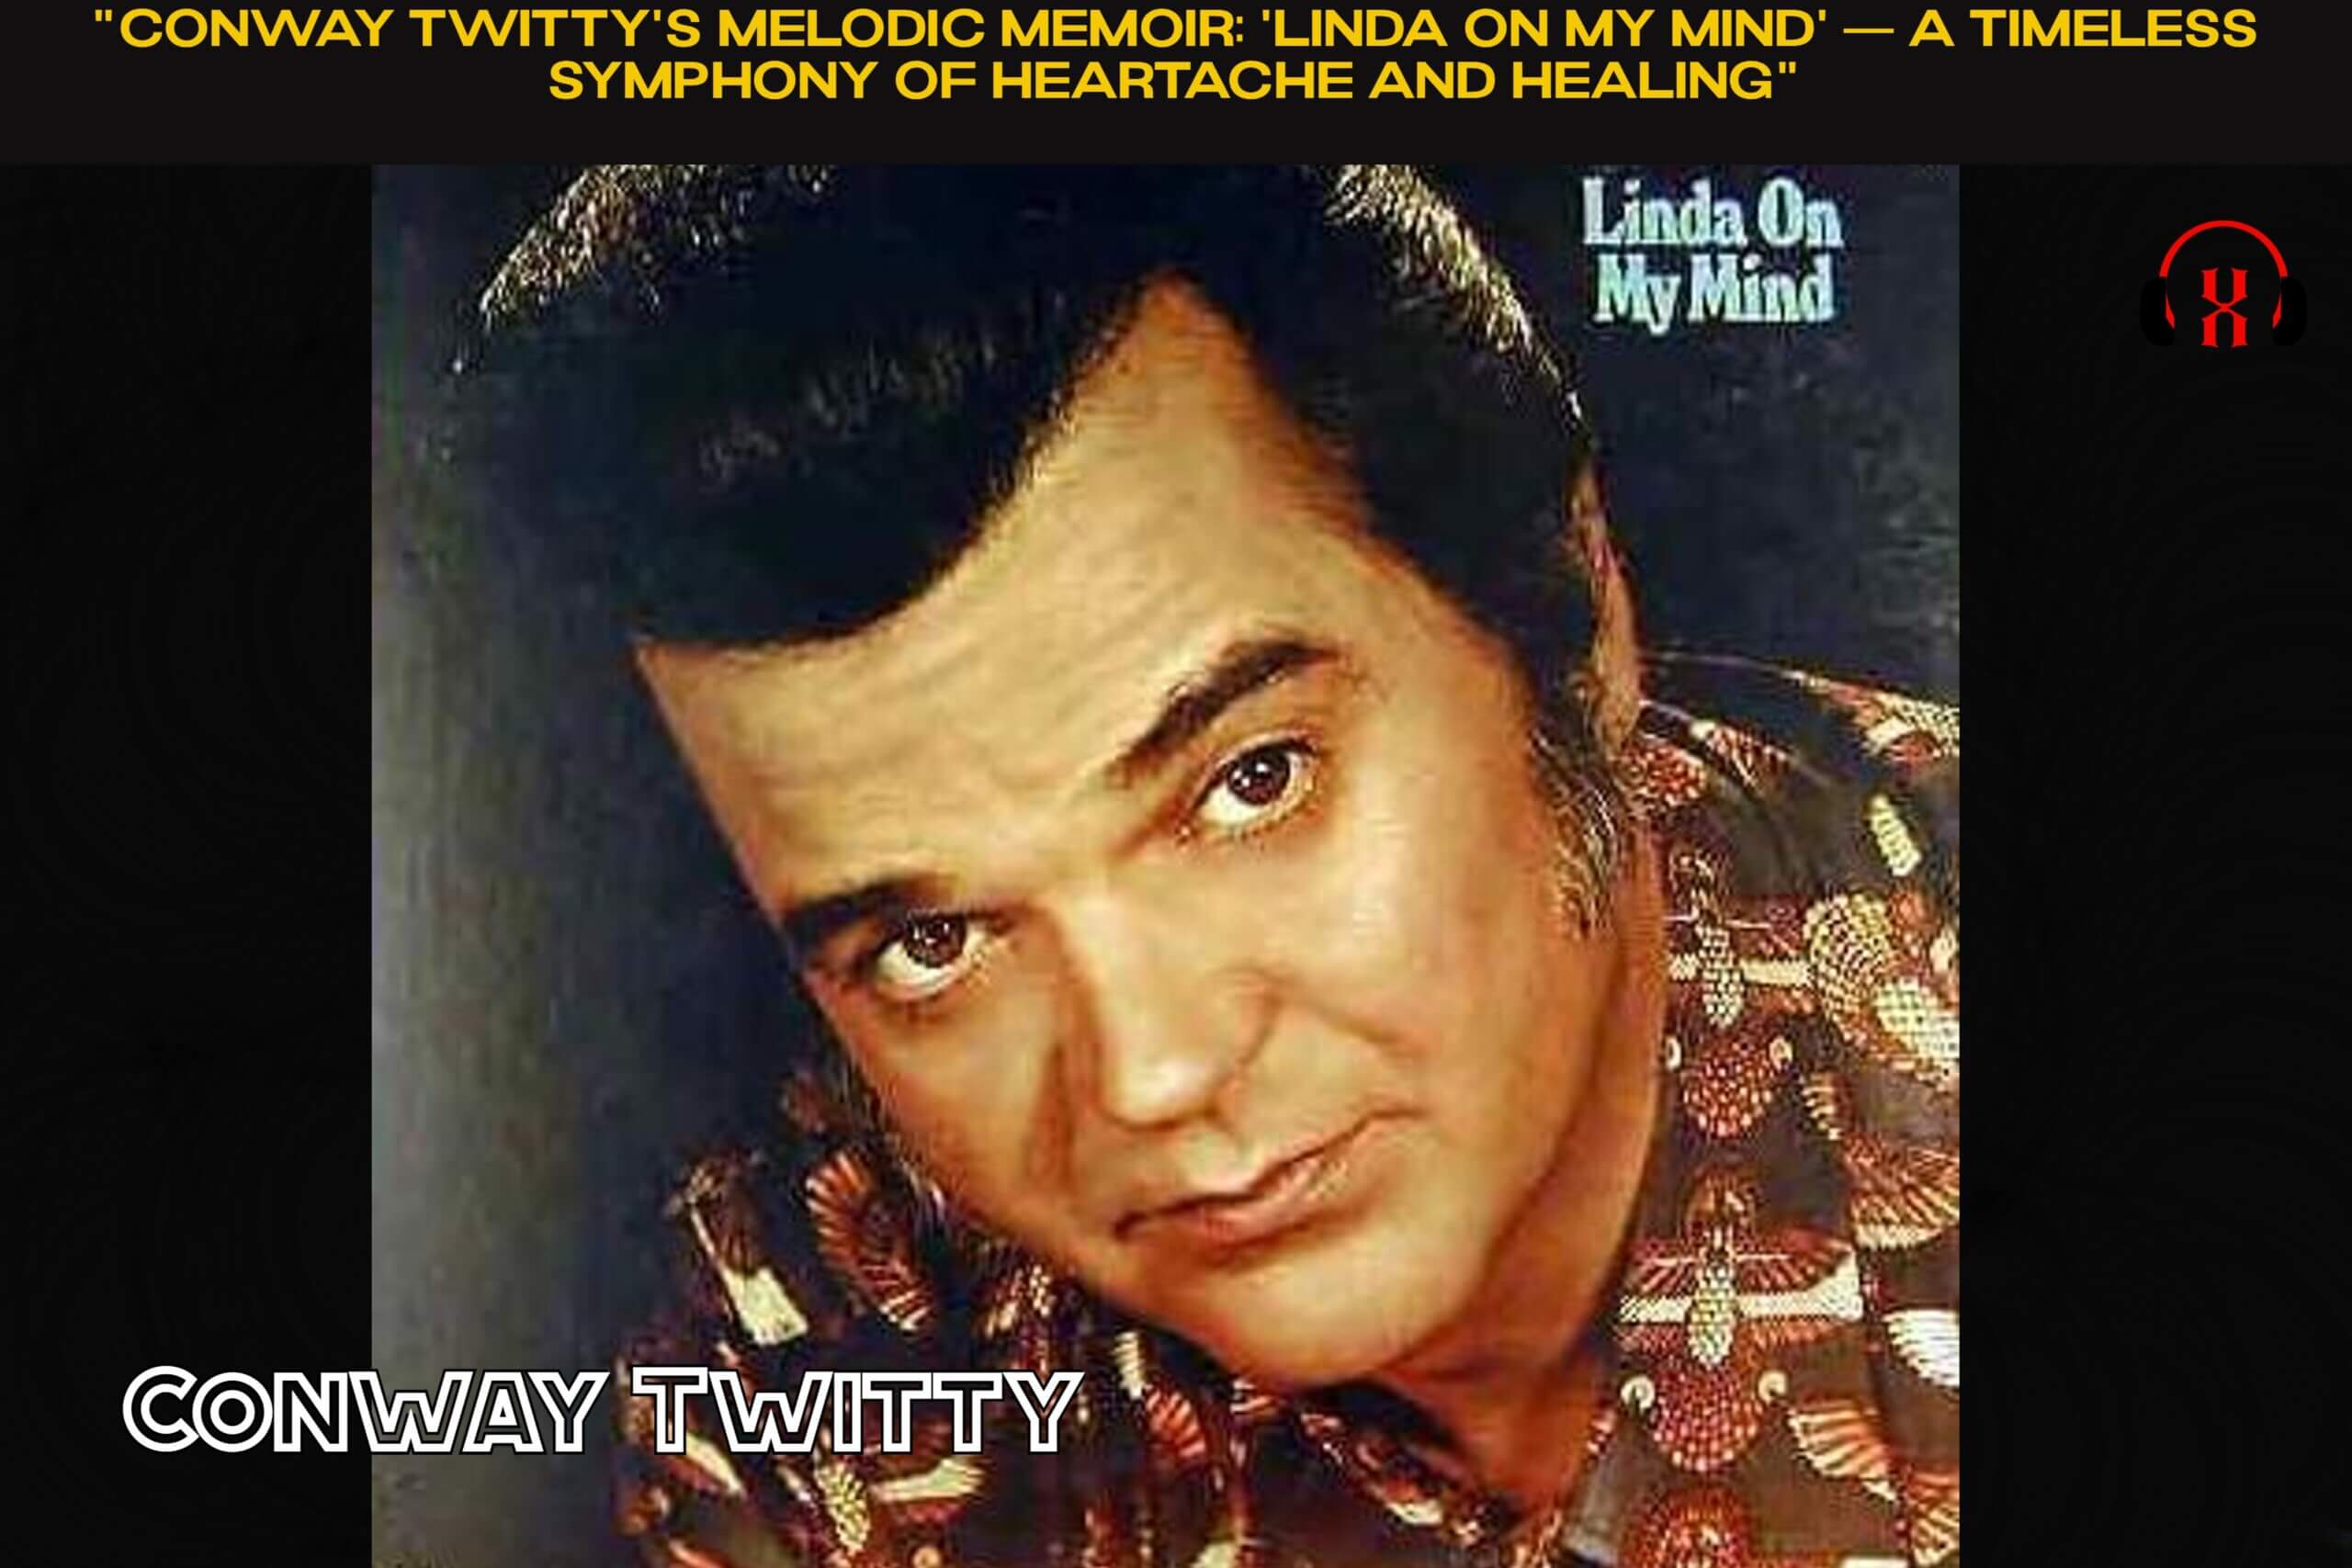 “Conway Twitty’s Melodic Memoir: ‘Linda on My Mind’ — A Timeless Symphony of Heartache and Healing”